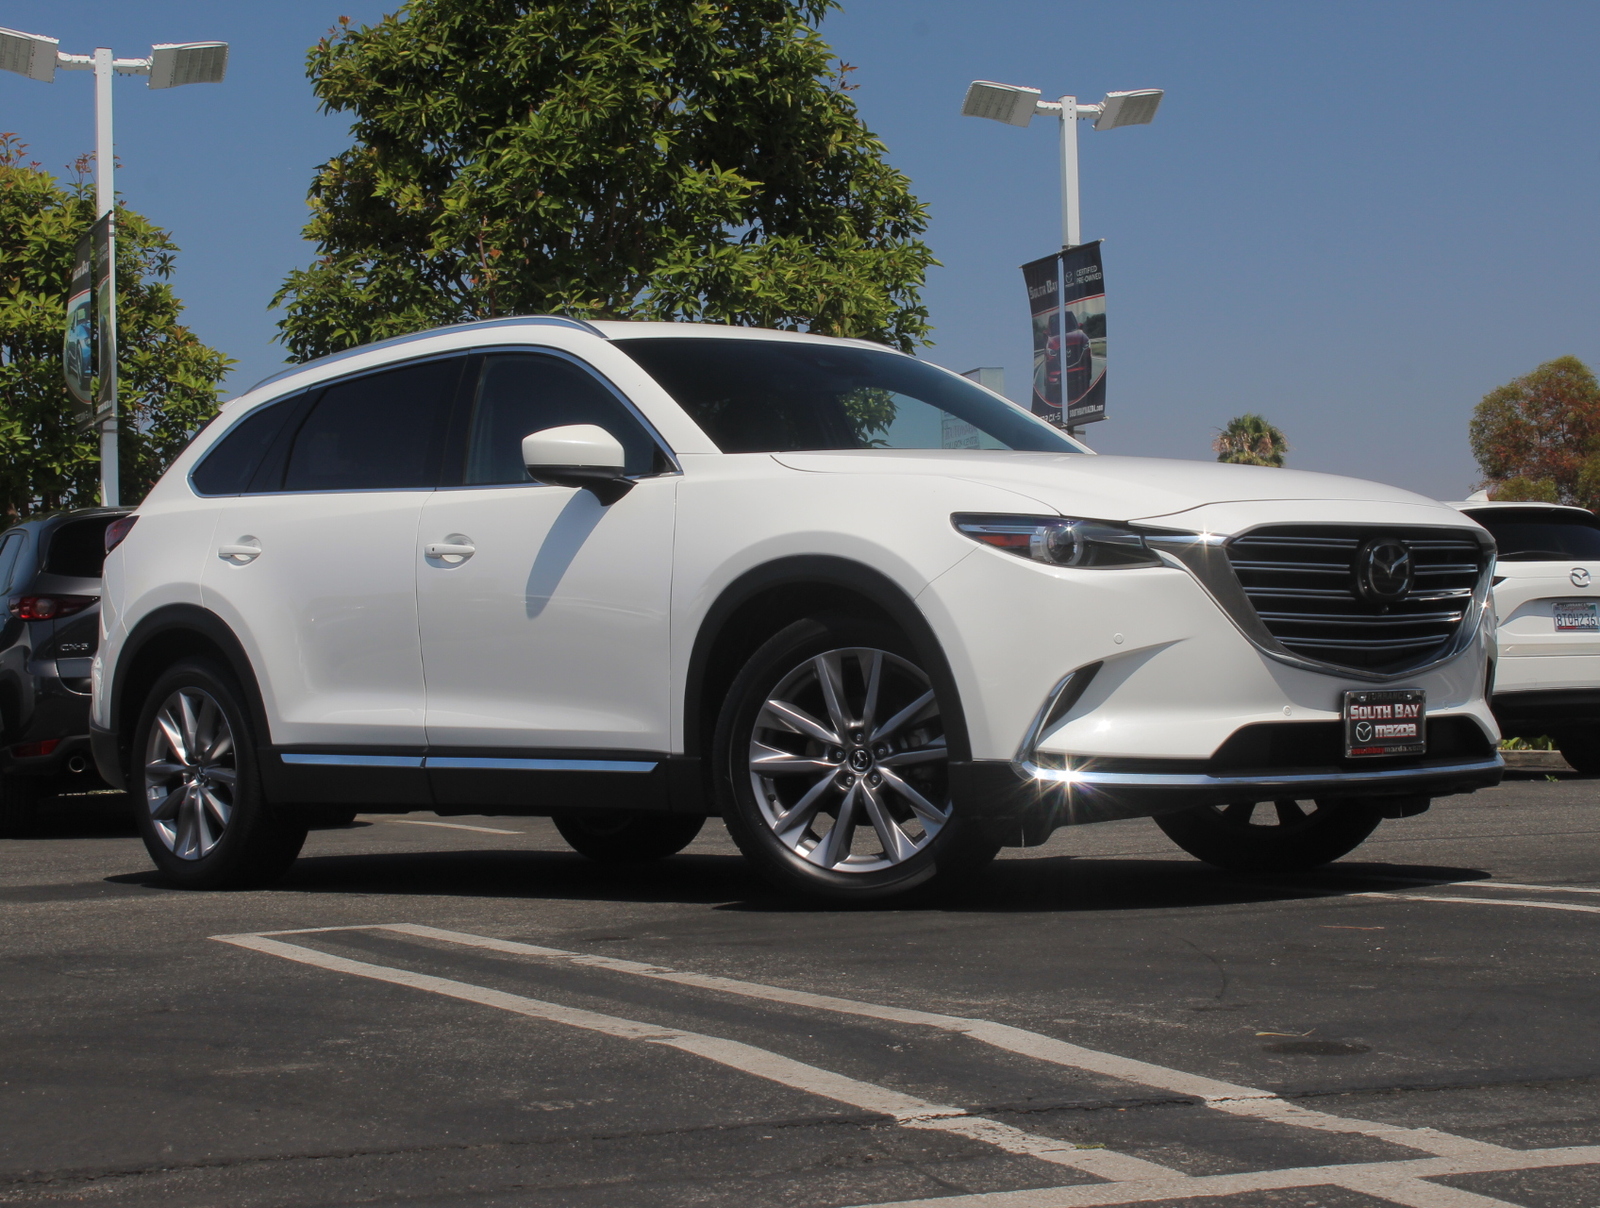 Certified Pre-Owned 2021 Mazda CX-9 Grand Touring SUV in Torrance #S501510  | South Bay Mazda